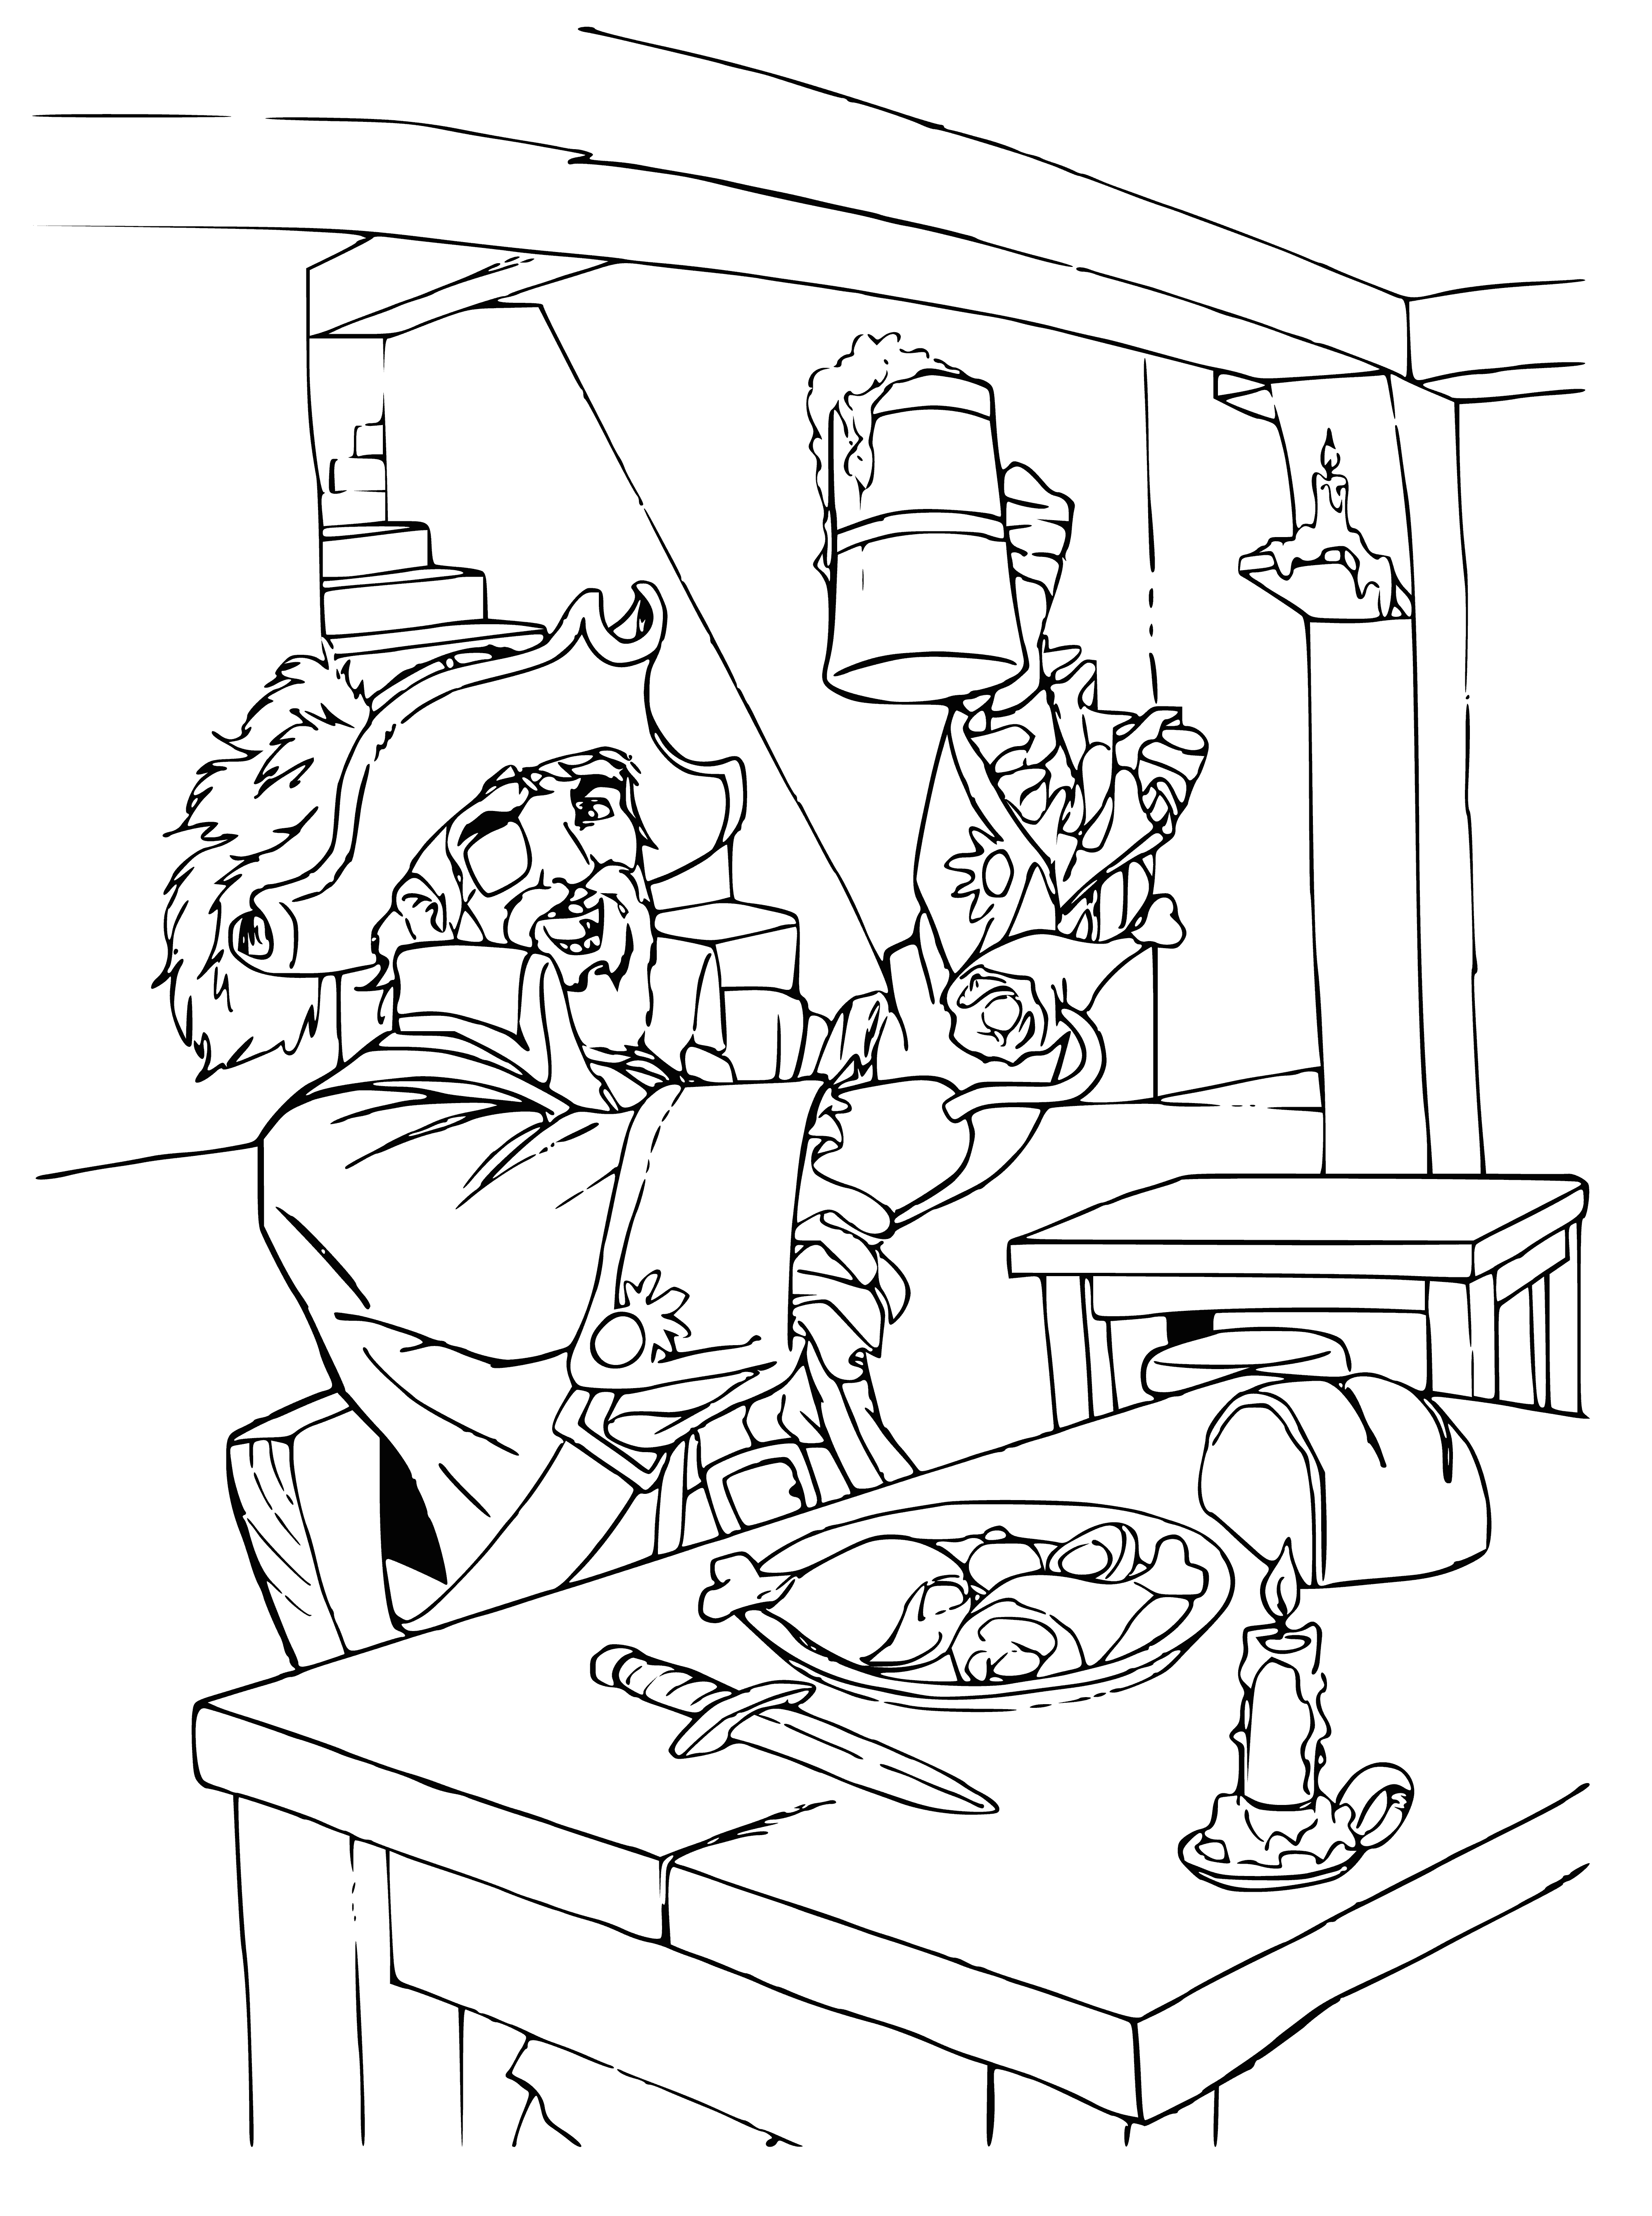 coloring page: Pirate Captain sits in a dark room, eating soup and plotting his course on a map. He has a sword and knife close by.